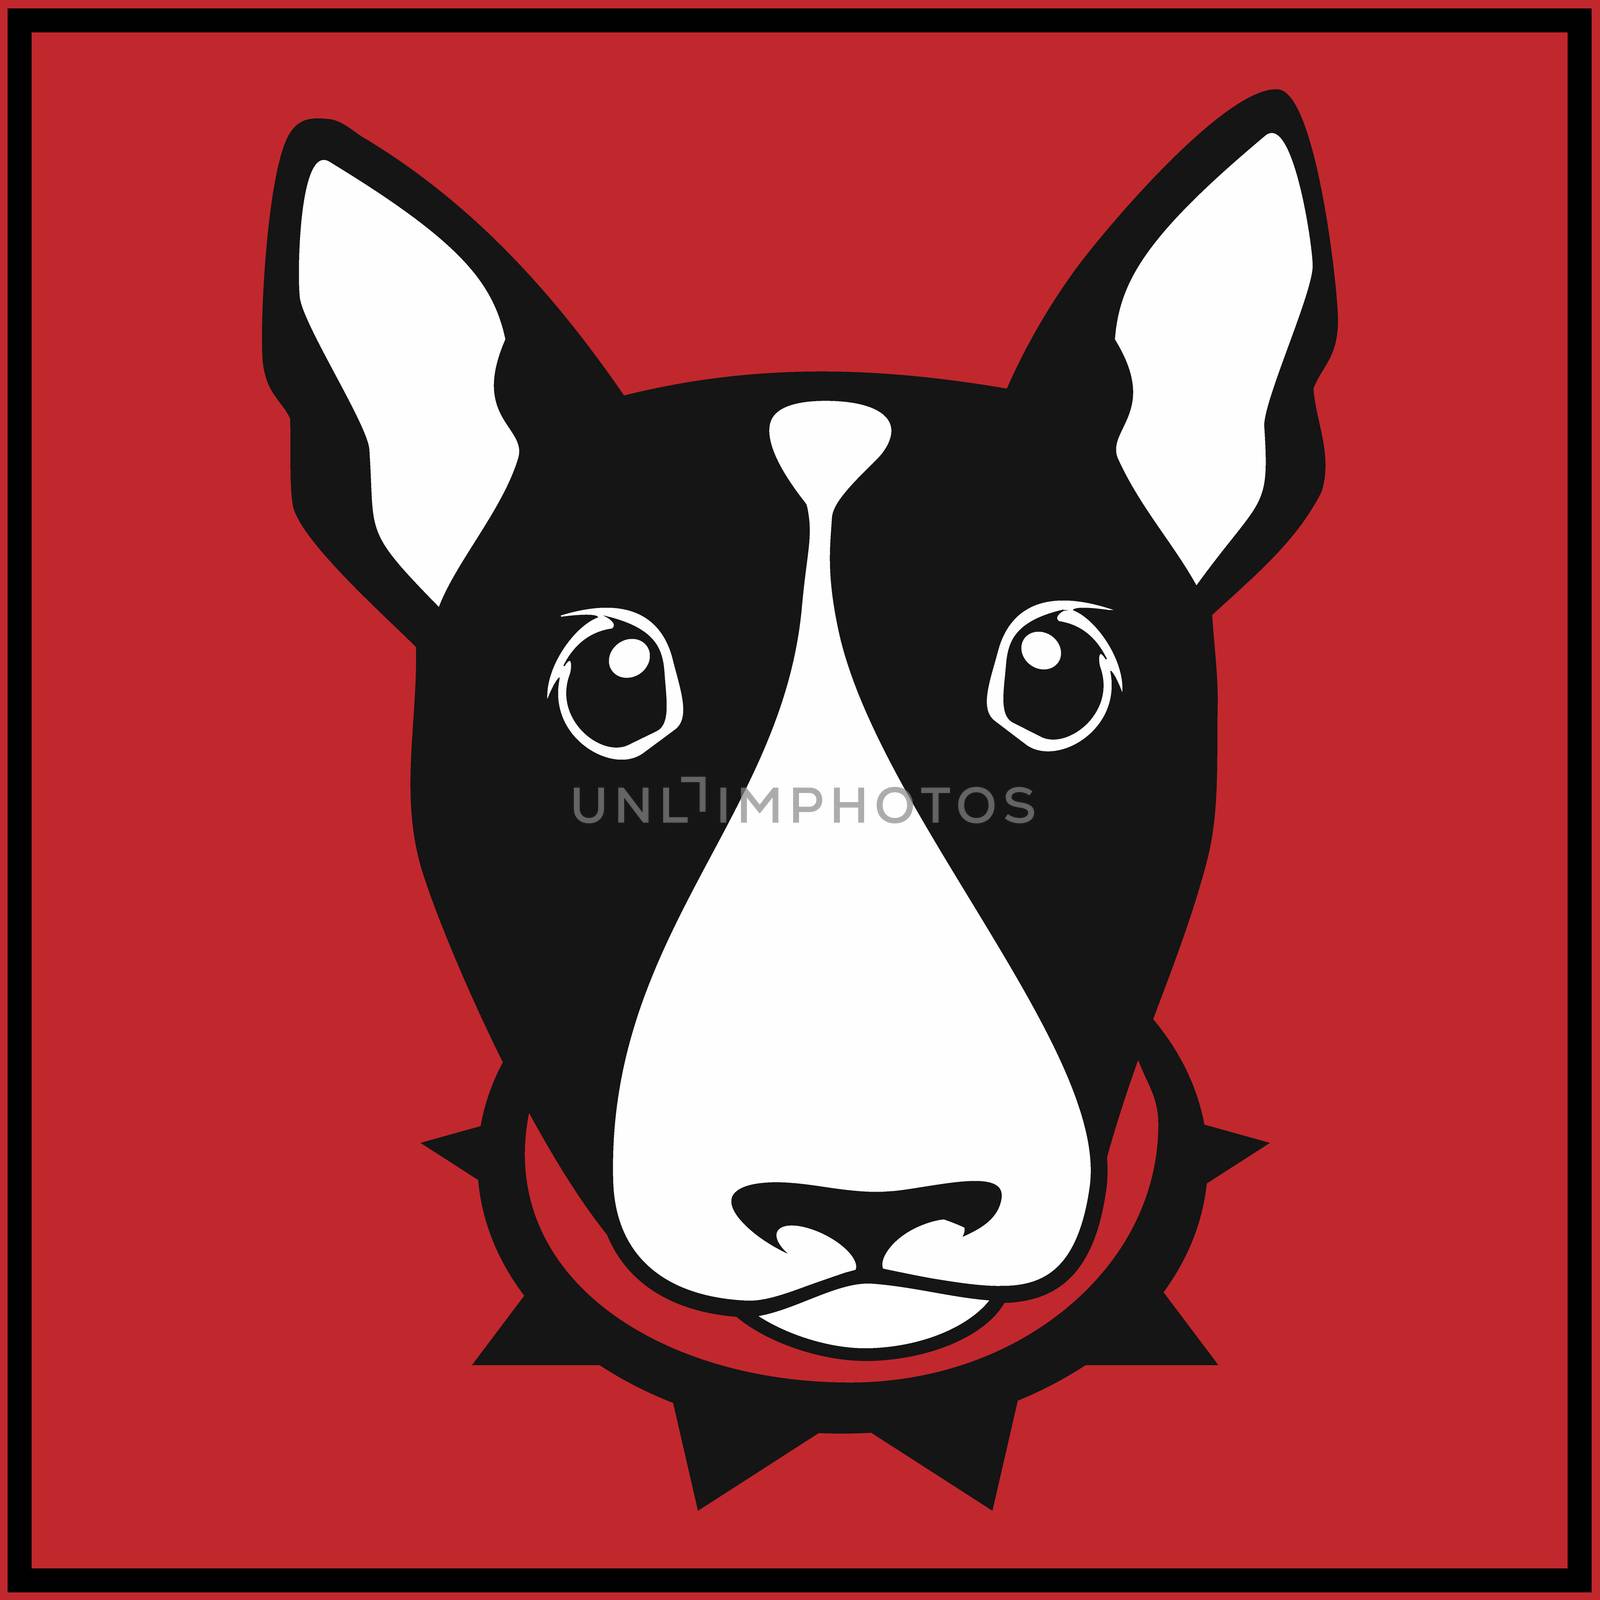 Cute bull terrier with dog collar on red background